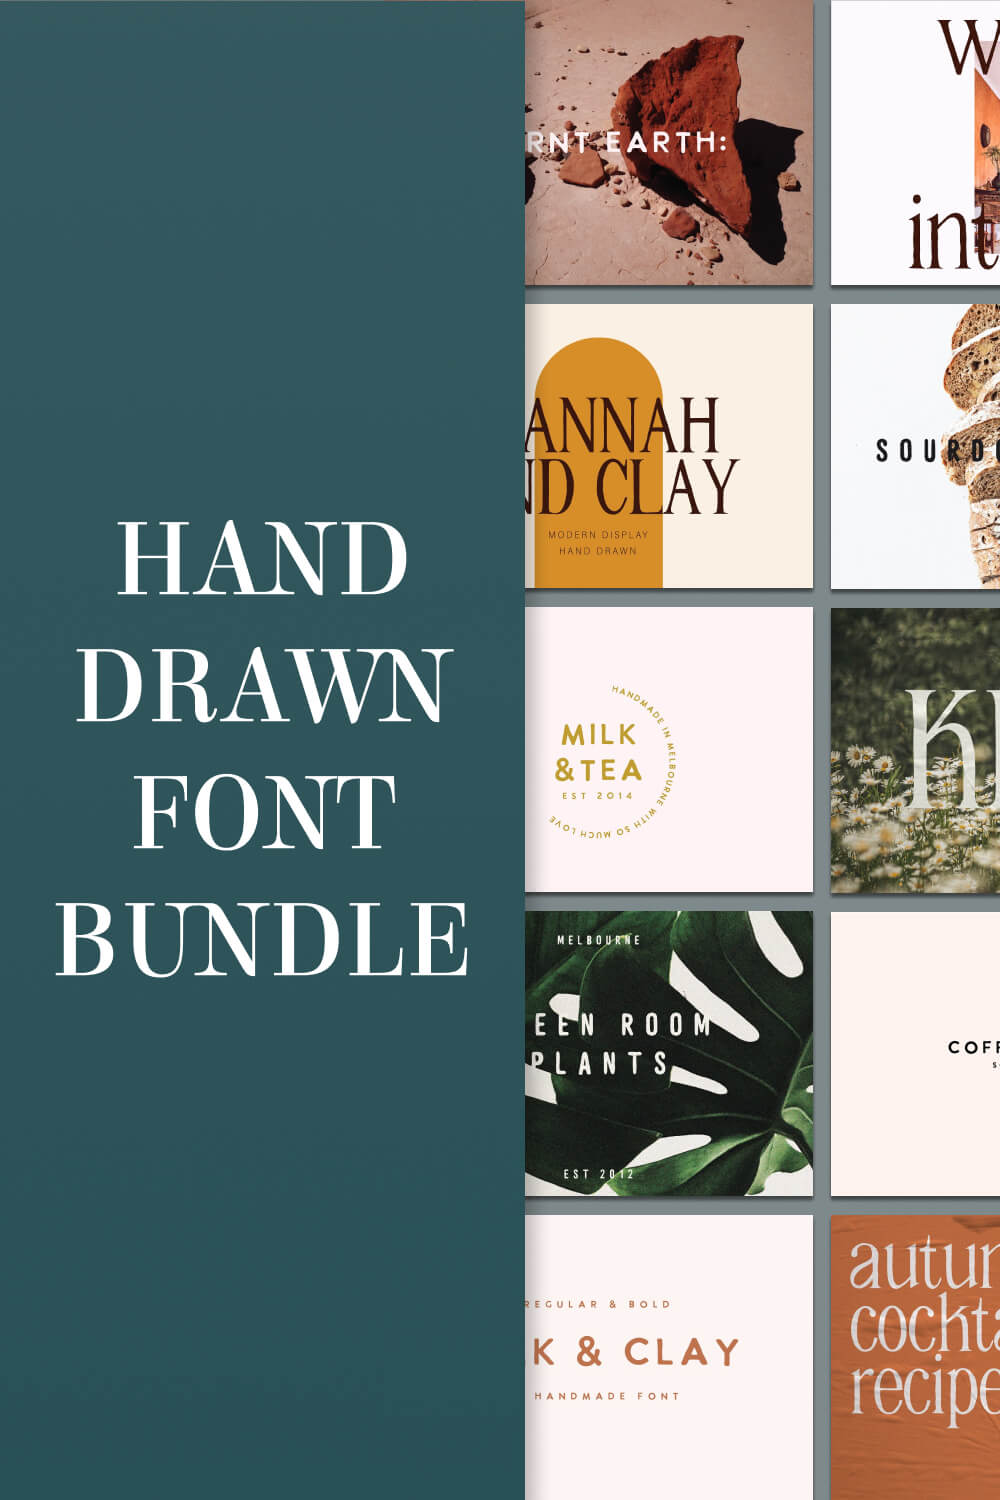 The picture is divided in half on one side, the inscription "Hand drawn font bundle" on the other side of the slides.